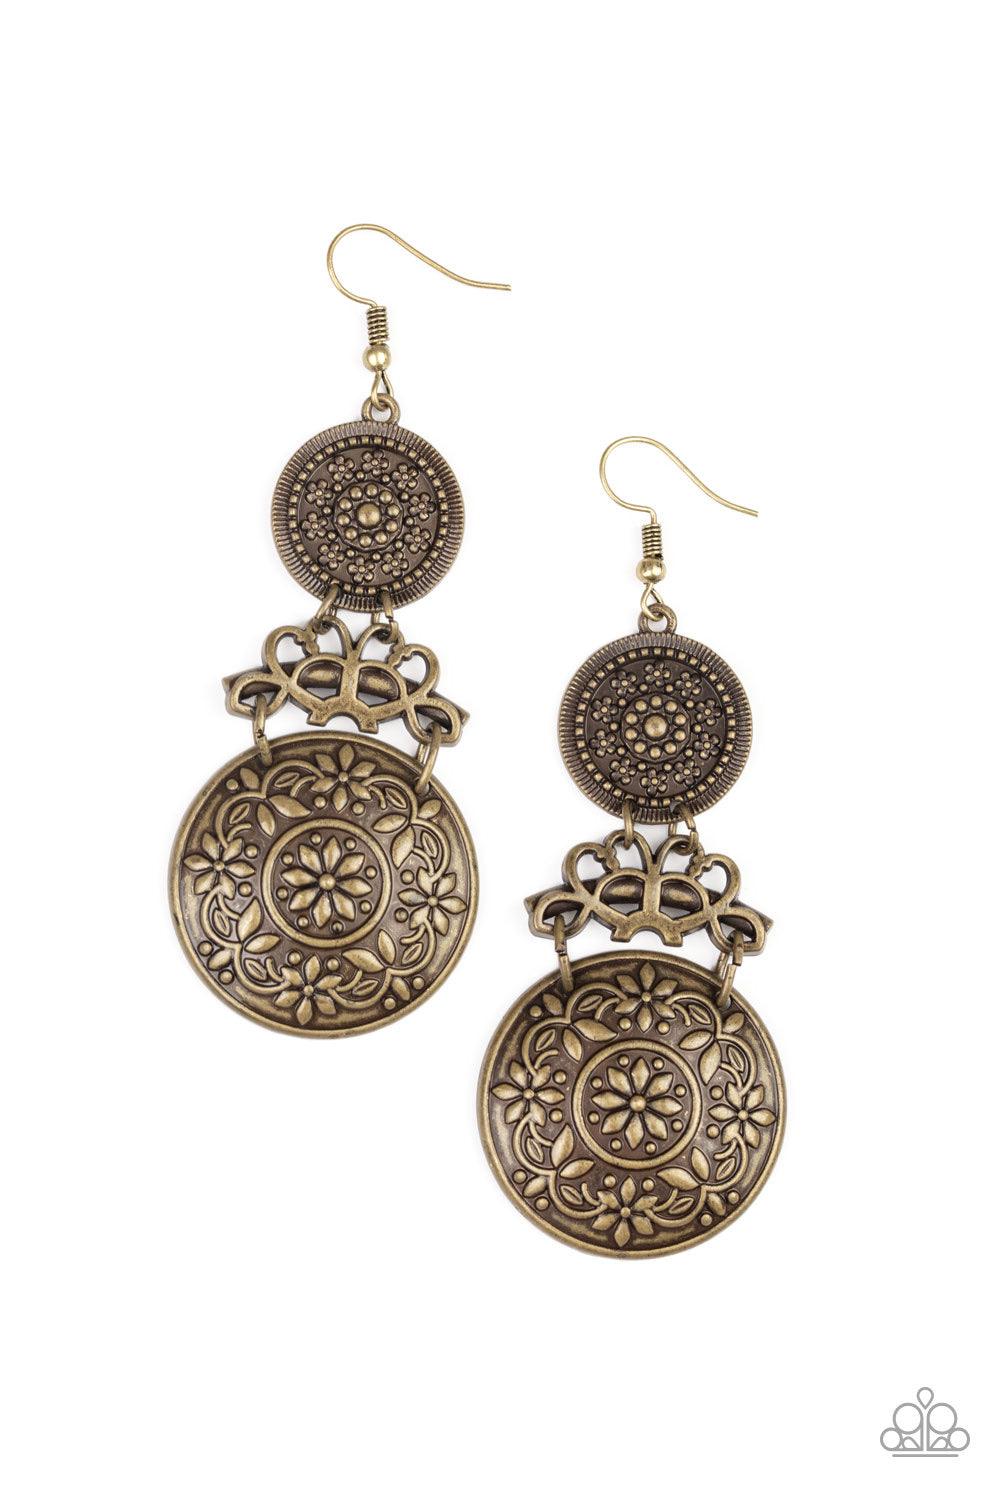 Paparazzi Accessories Garden Adventure - Brass Embossed and studded in antiqued floral patterns, flowery brass discs flank a vine-like brass fitting, coalescing into a whimsical lure. Earring attaches to a standard fishhook fitting. Jewelry